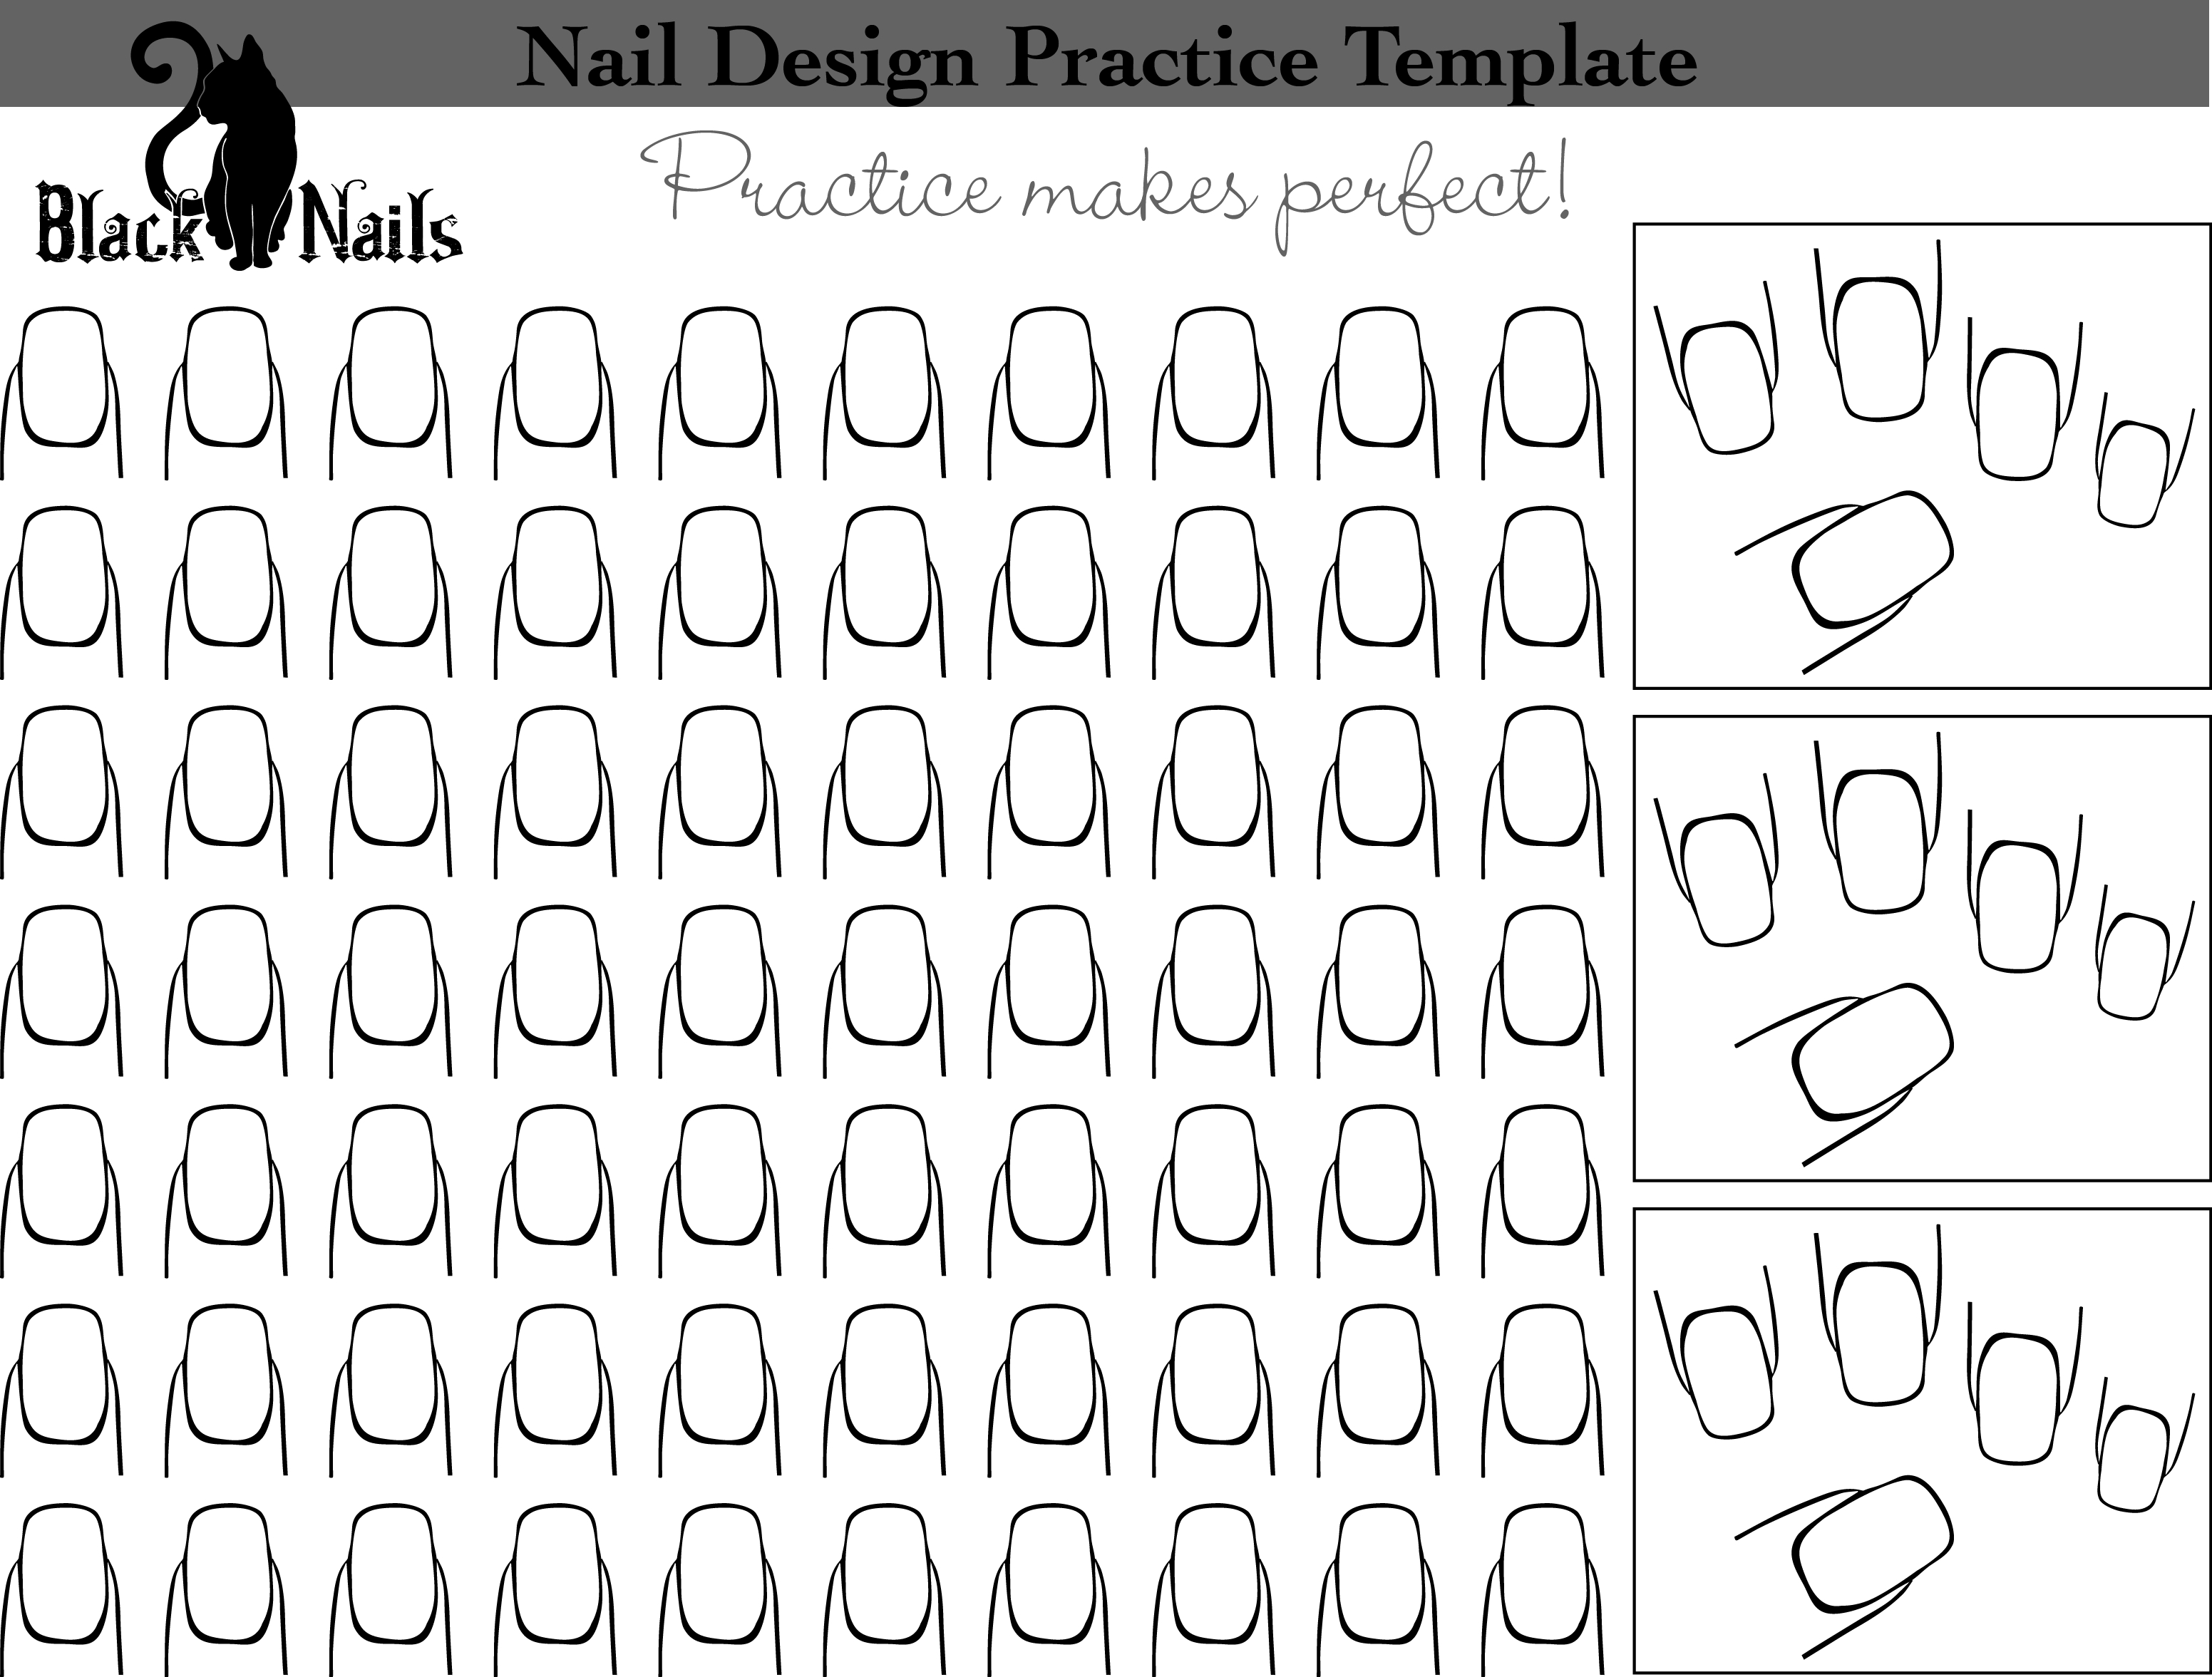 2. How to Price Your Nail Art Services - wide 8